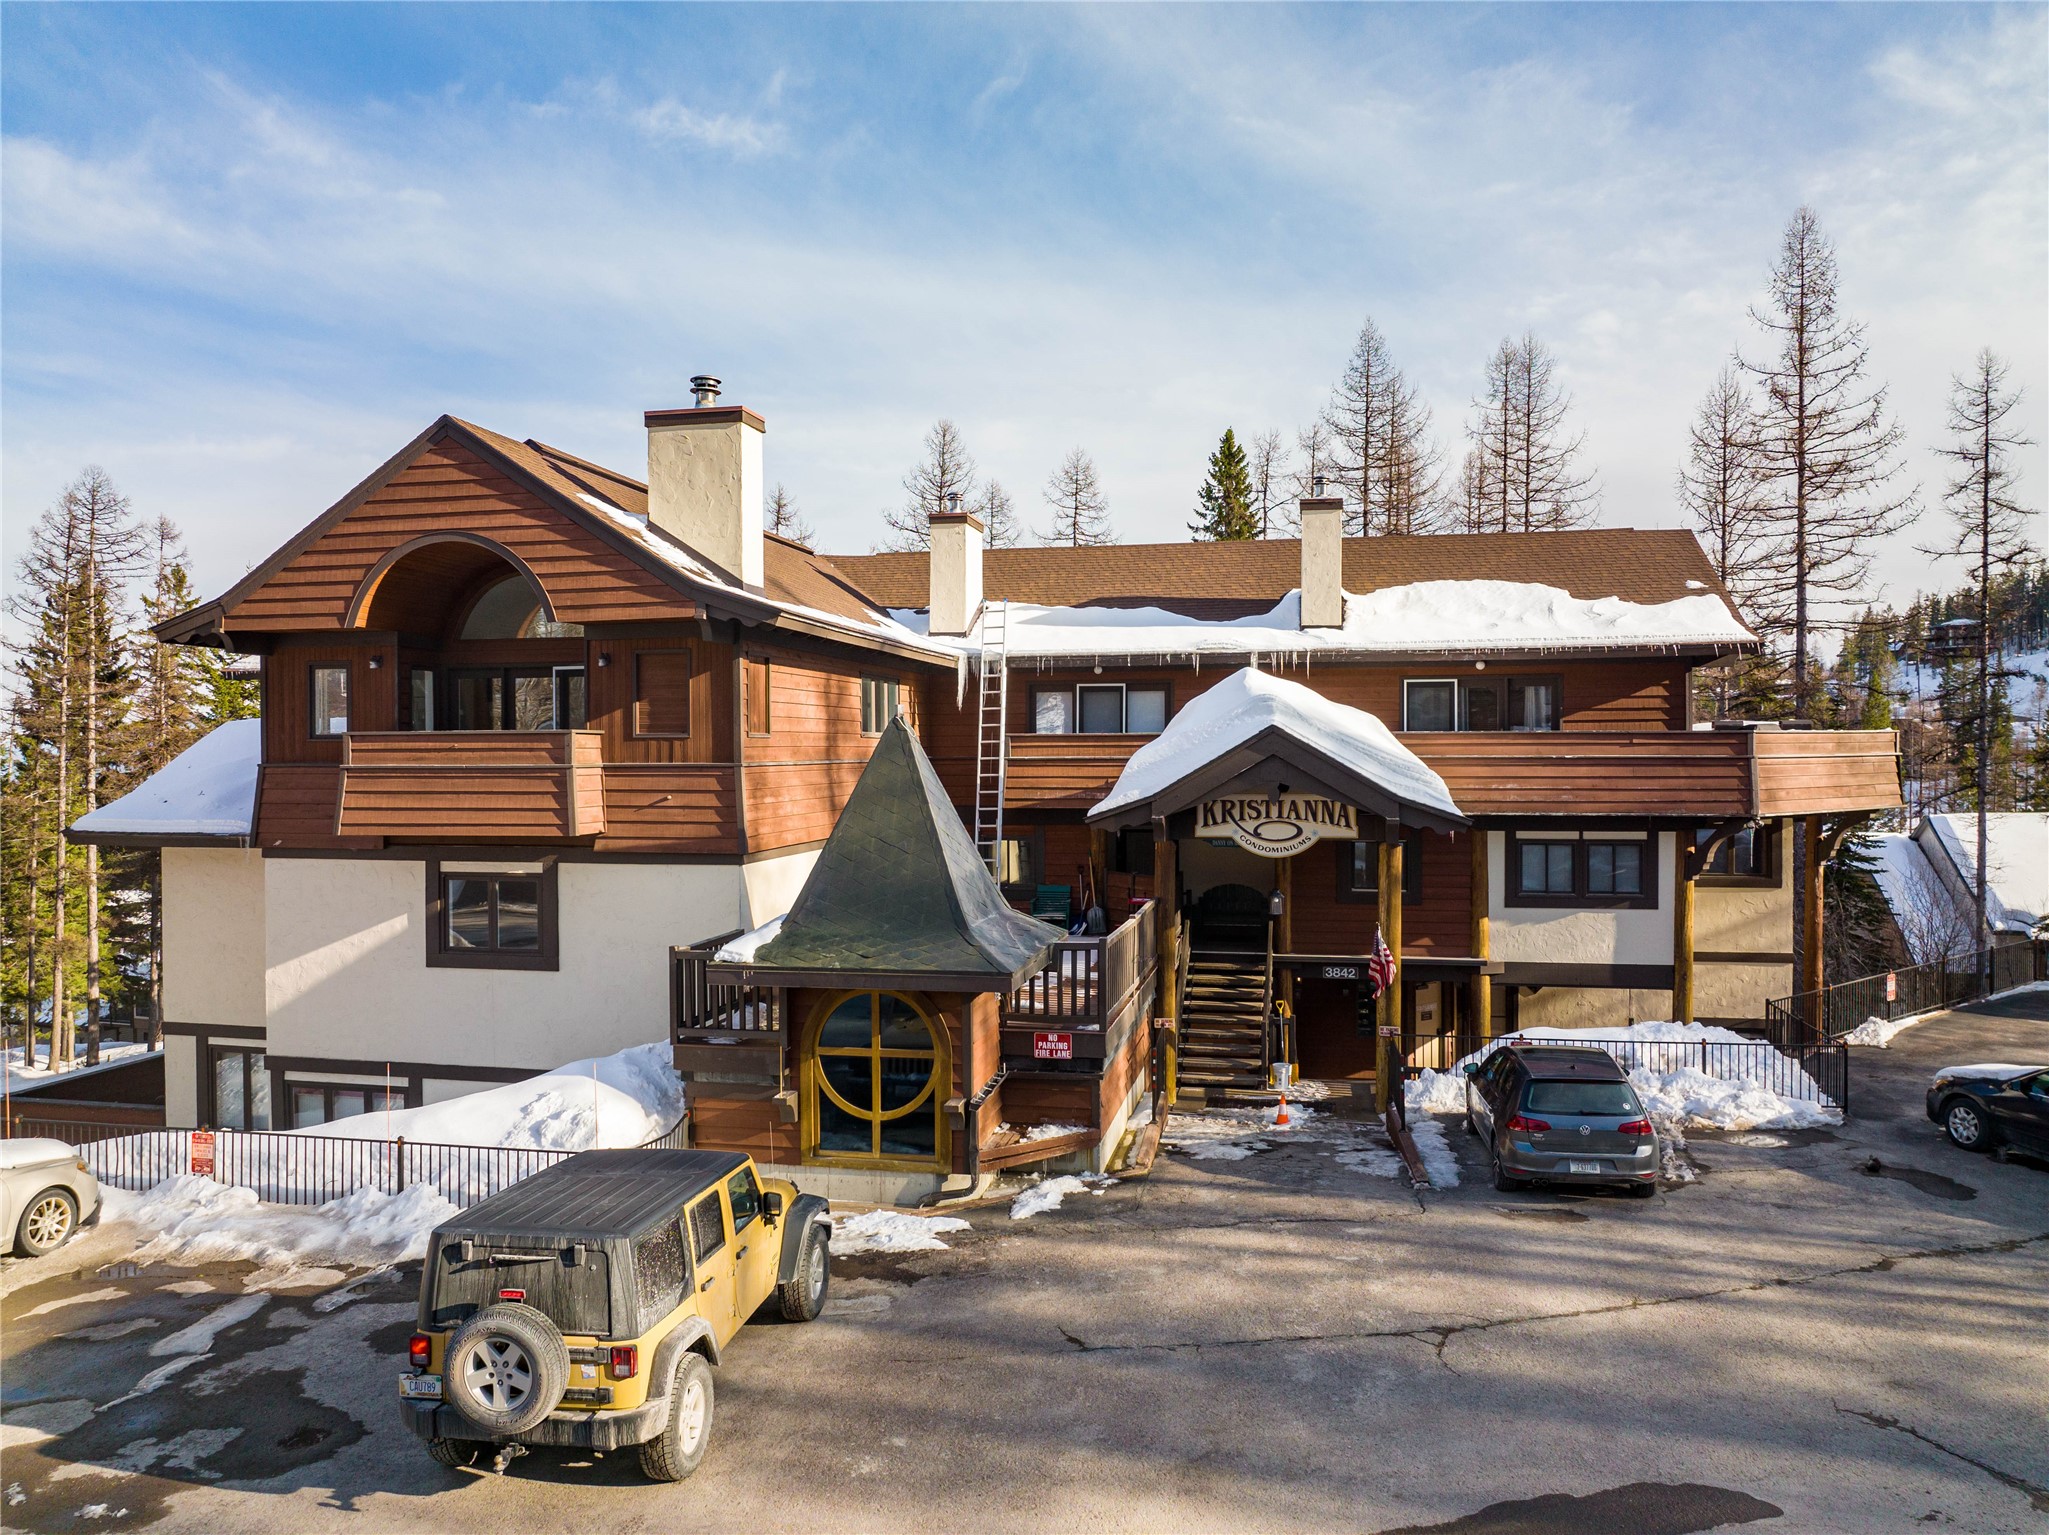 MOTIVATED SELLER! TURN KEY, FULLY FURNISHED, NIGHTLY RENTAL! Prime ski-in, ski-out condo at the legendary Kristianna lodge at Whitefish Mountain Resort just moments away from Chair 3. Great rental potential from this 1500sf, 3Br/3Ba unit featuring an upper level kitchen/great room with vaulted ceiling, large windows, and a private deck with spectacular views of the mountain and village. Ski down to The Hibernation House for breakfast and ride The Village Shuttle to your choice of Chair 1, 2, or The Base Lodge. Also just steps away from the Snowbus, providing free, convenient public transportation to downtown Whitefish. Conveniently located near hiking and biking cross country trails. Common areas include spa room with sauna and hot tub, owners'-only ski locker room, coin-operated laundry, and covered deck with BBQ facilities. Contact Jennifer VanSwearingen at (406)871-6917 or your real estate professional.